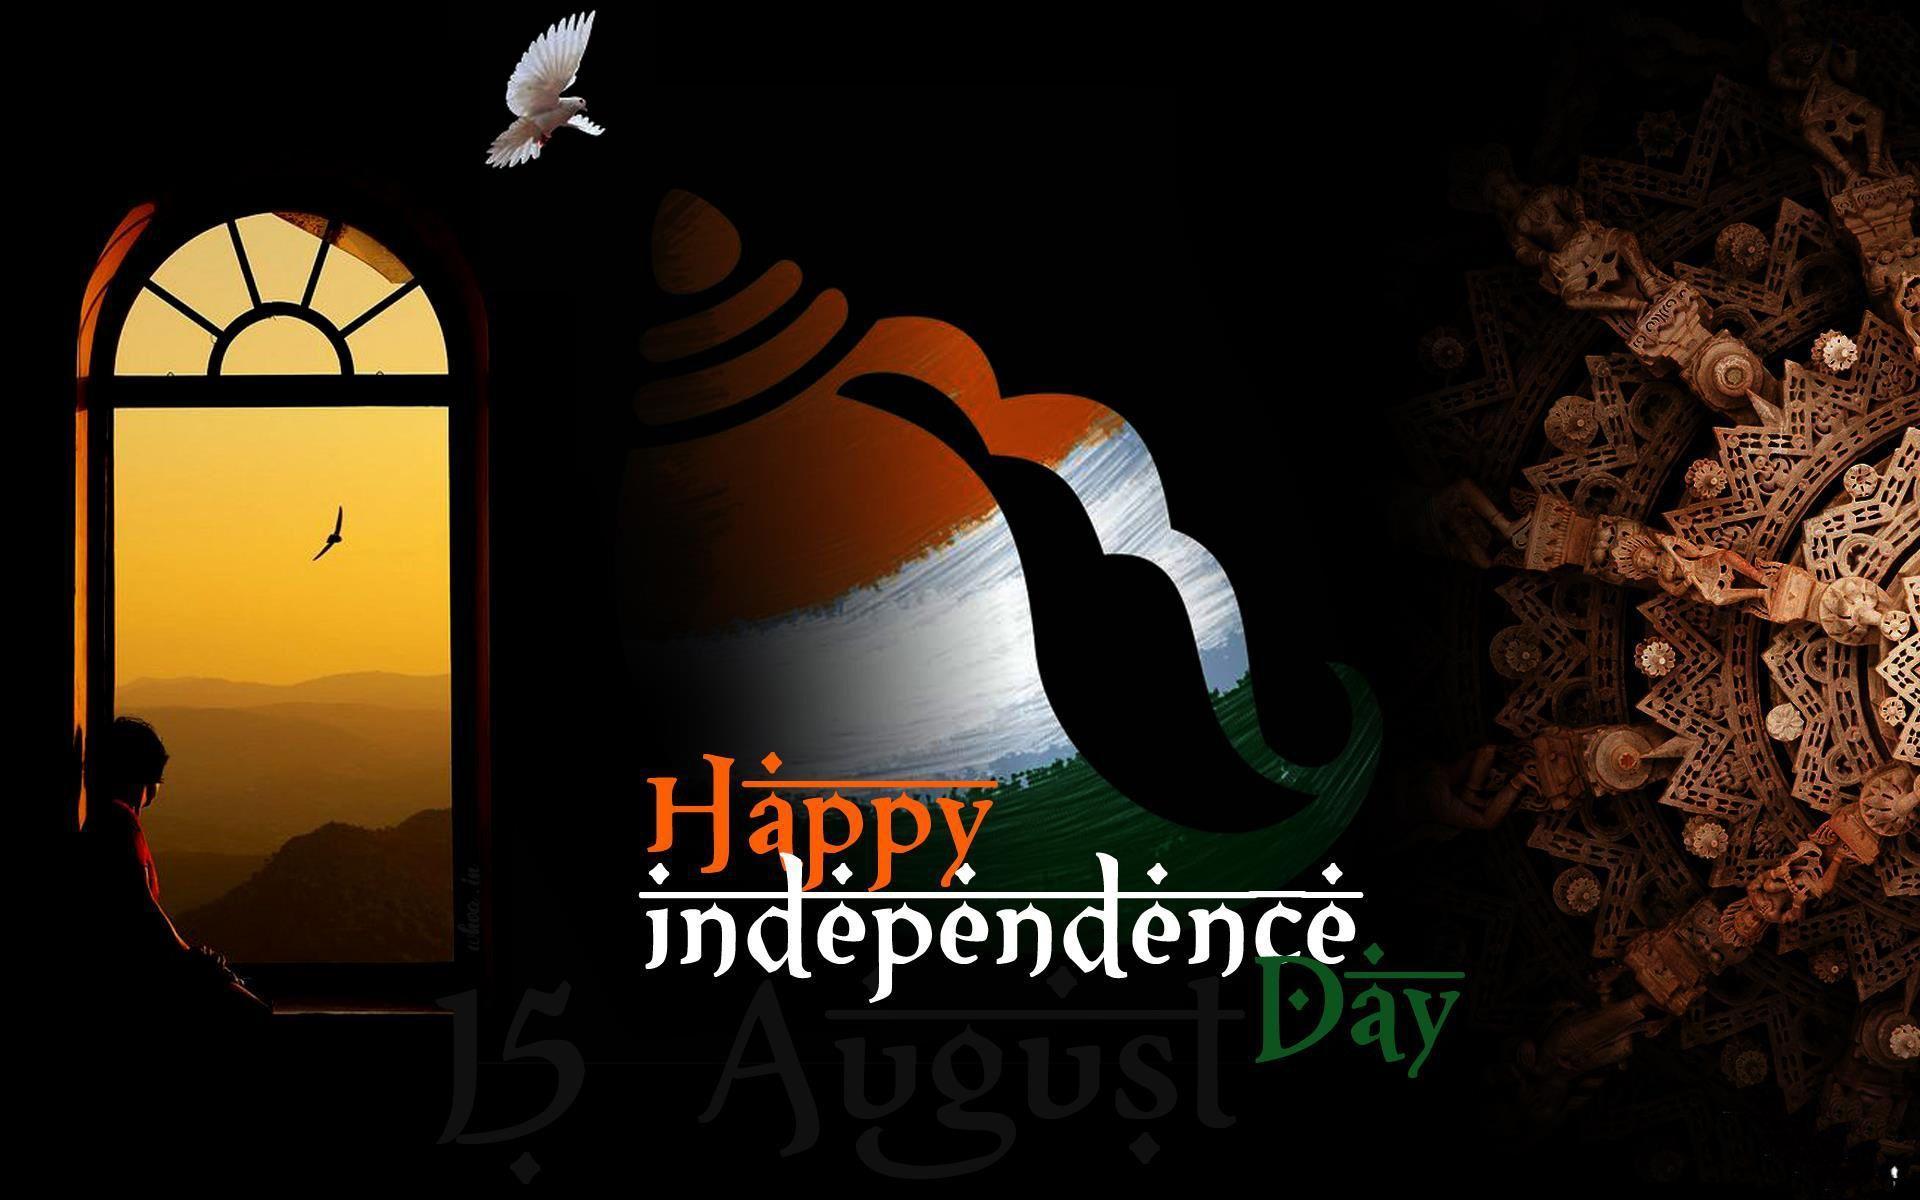 15th August Happy Independence Day HD Wallpaper Pics Image